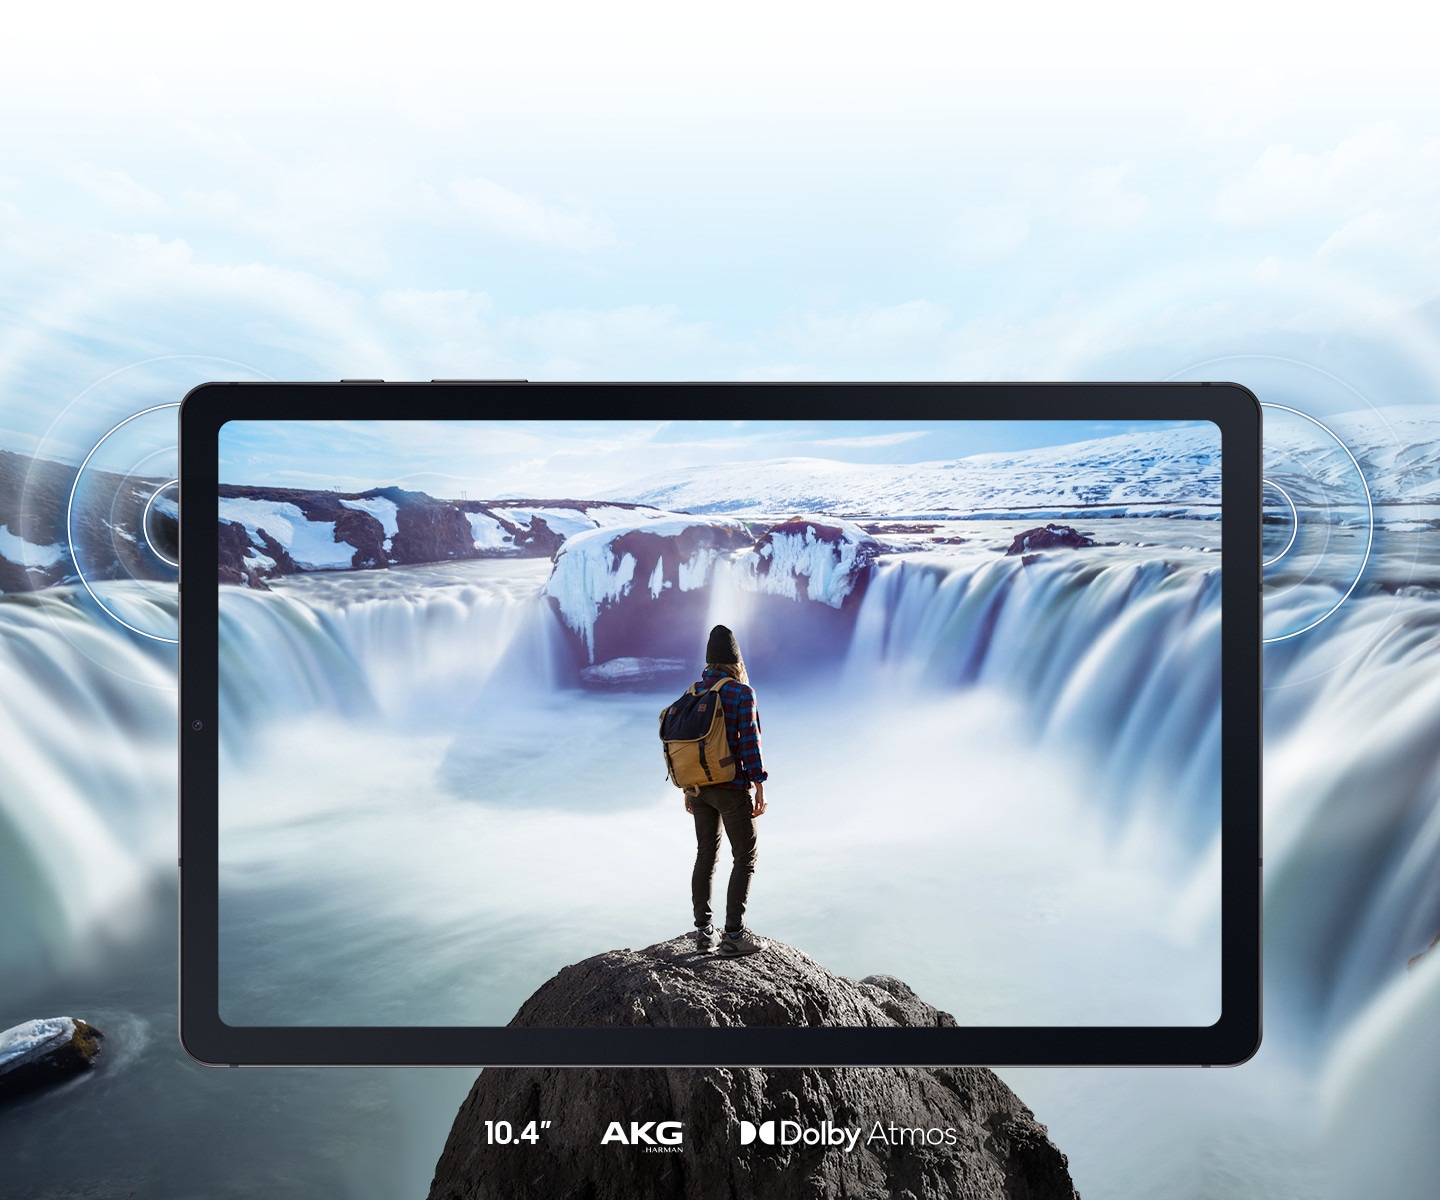 An image of a backpacker standing on a cliff in front of a waterfall is shown on a Galaxy Tab S6 Lite device in landscape orientation. The picture extends outside of the device's screen in all directions to highlight the immersive experience from the small-bezel screen and dual speakers. The AKG and Dolby Atmos logos are displayed.